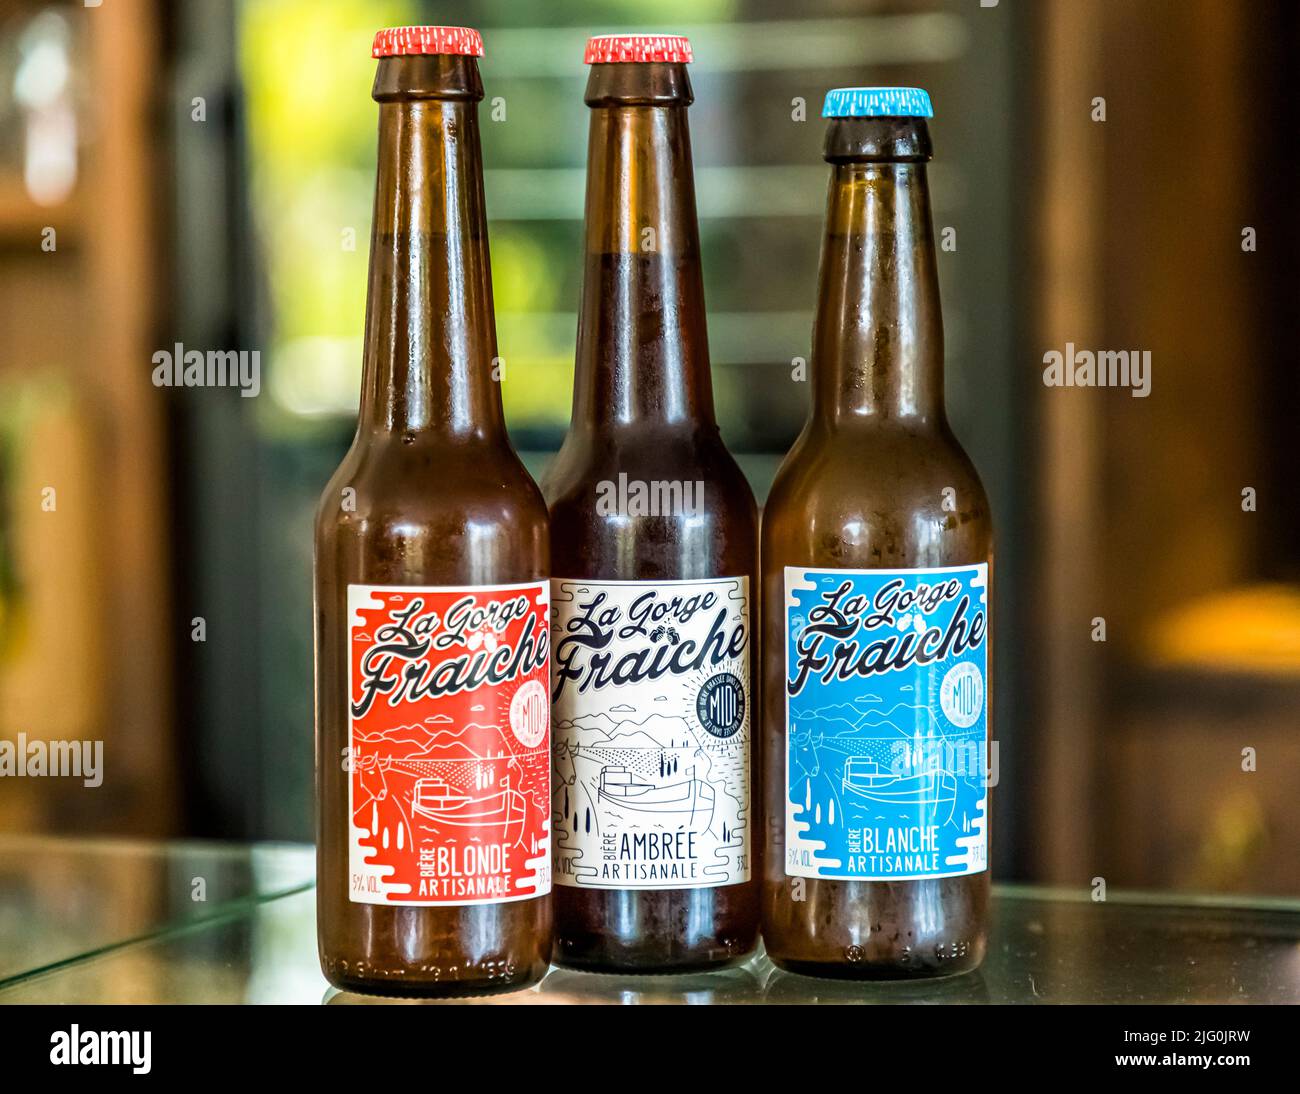 The Ambrée craft beer from the brewery La Gorge Fraiche near Montpellier, France Stock Photo